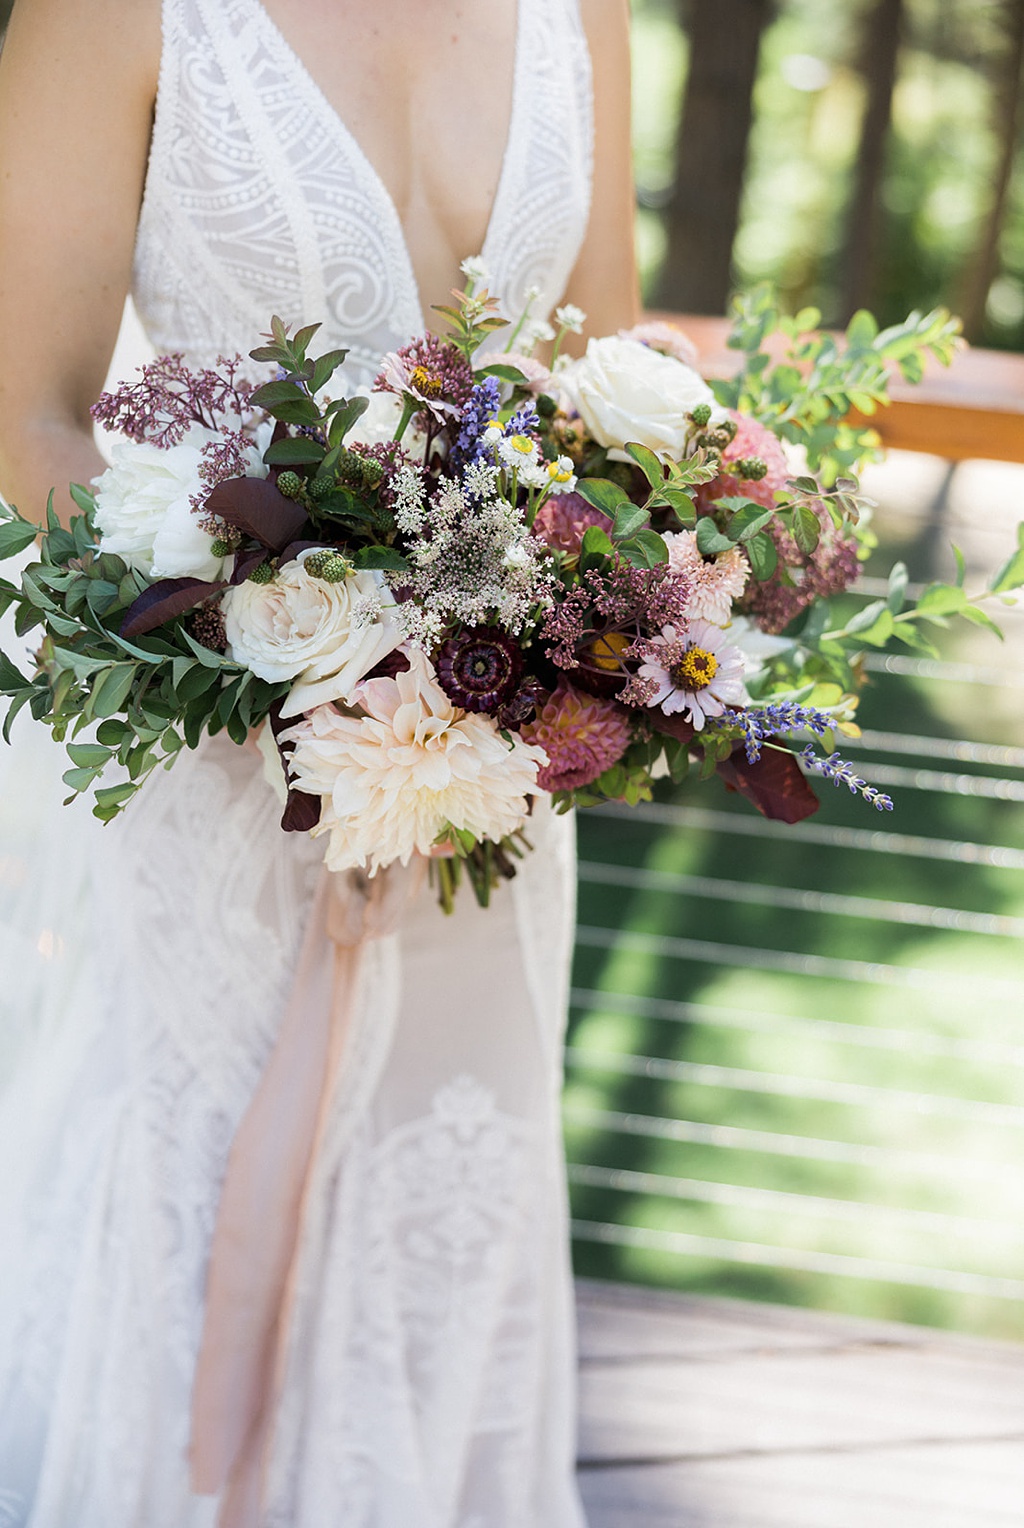 A close up of the summer bridal bouquet used in this Tierra Retreat Center wedding